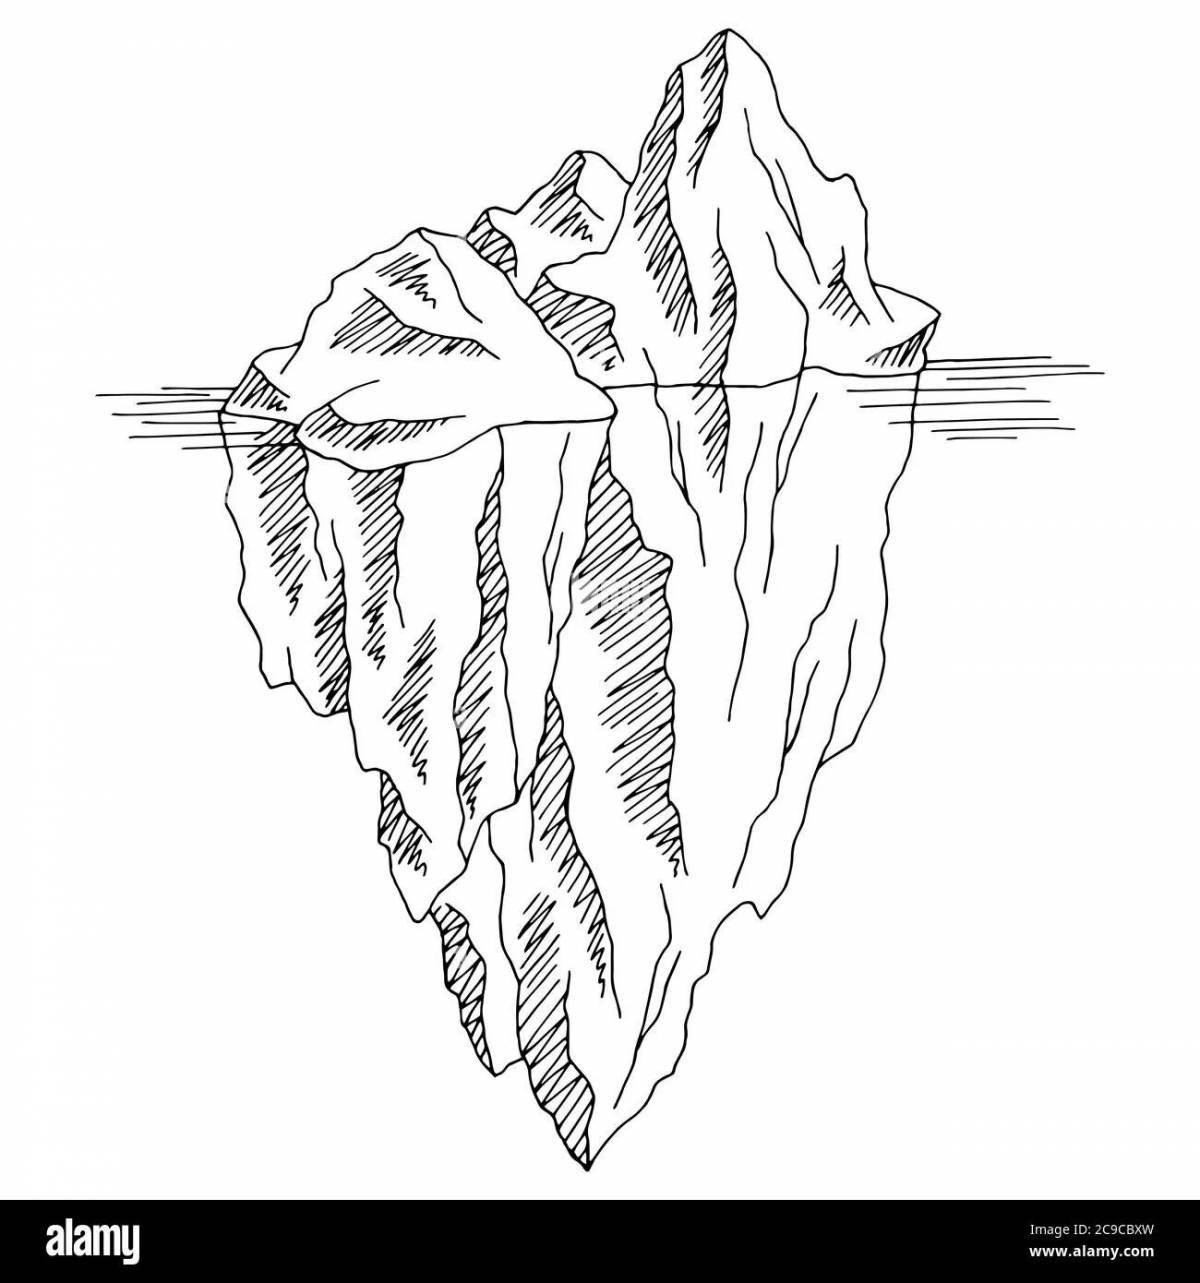 Sky iceberg coloring page